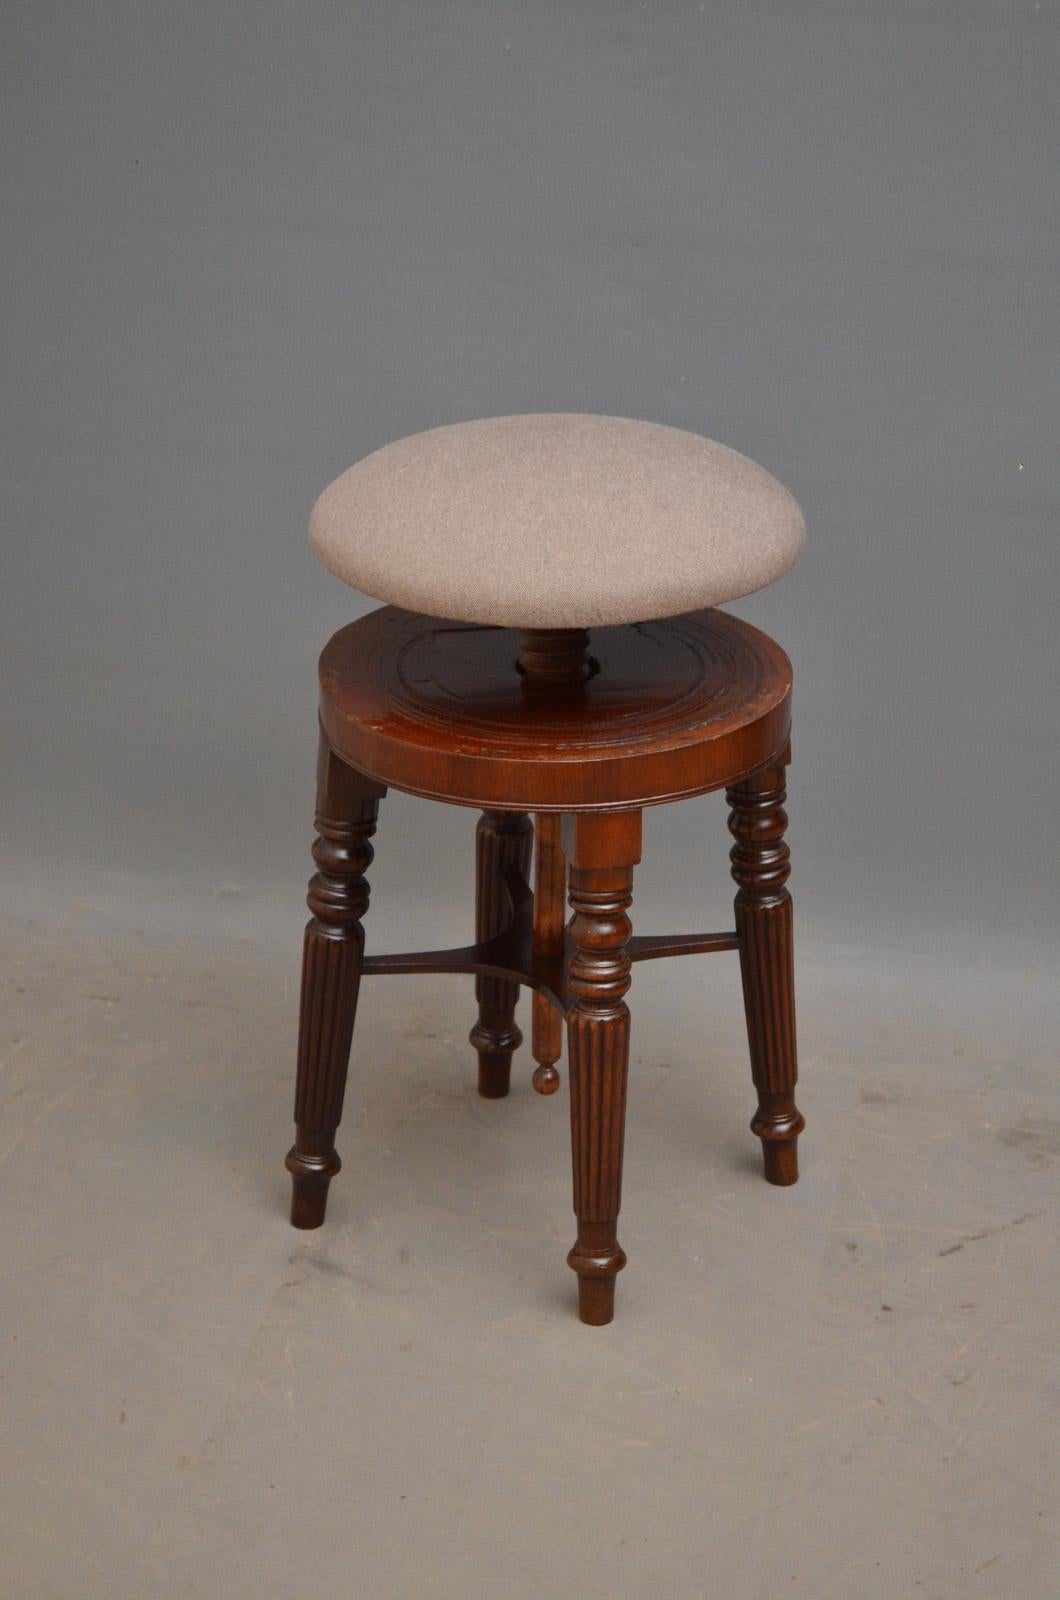 Sn4548, an elegant, Regency mahogany stool, having height adjustable revolving seat and 4 fluted, tapering legs united by cross stretchers. This antique stool would make a good stool for dressing table, circa 1820
Measures: Height 18